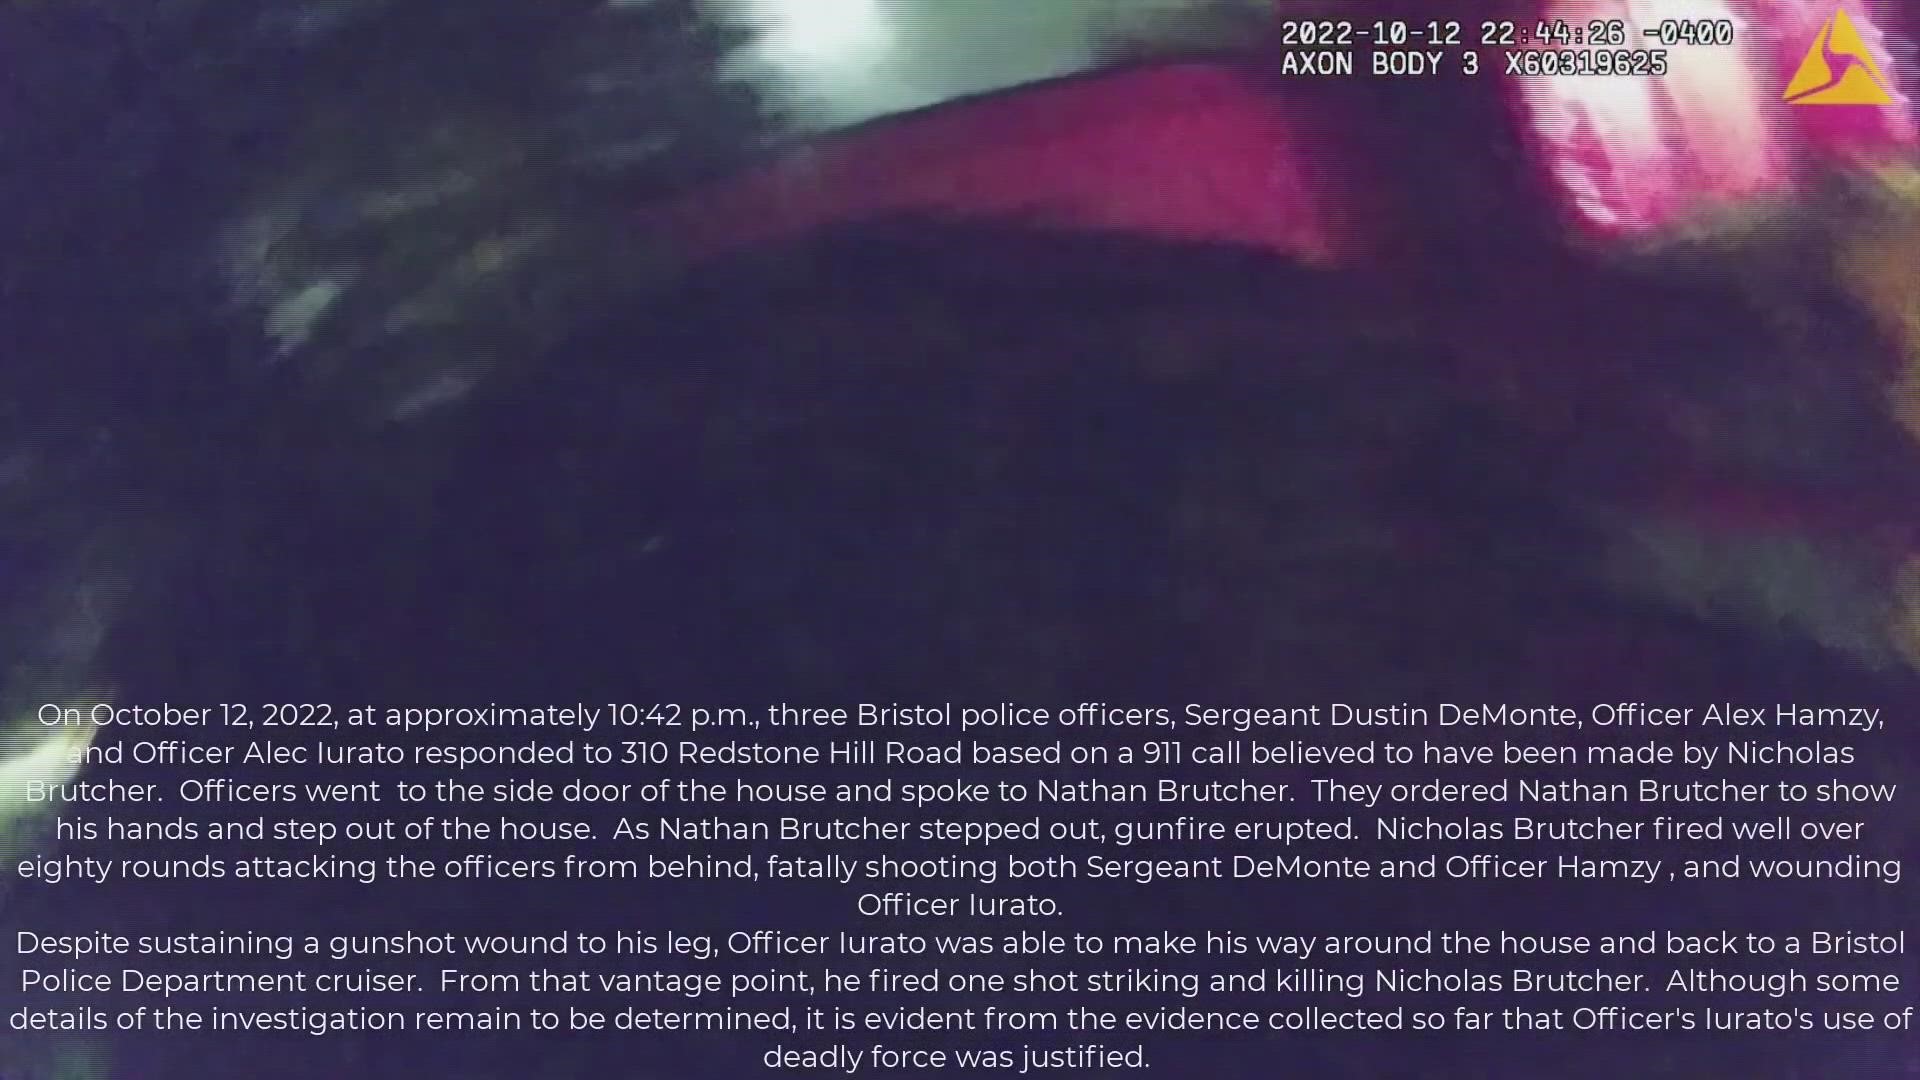 Bristol Police Department has released body camera footage of the October 12 shooting that killed two officers and wounded one.